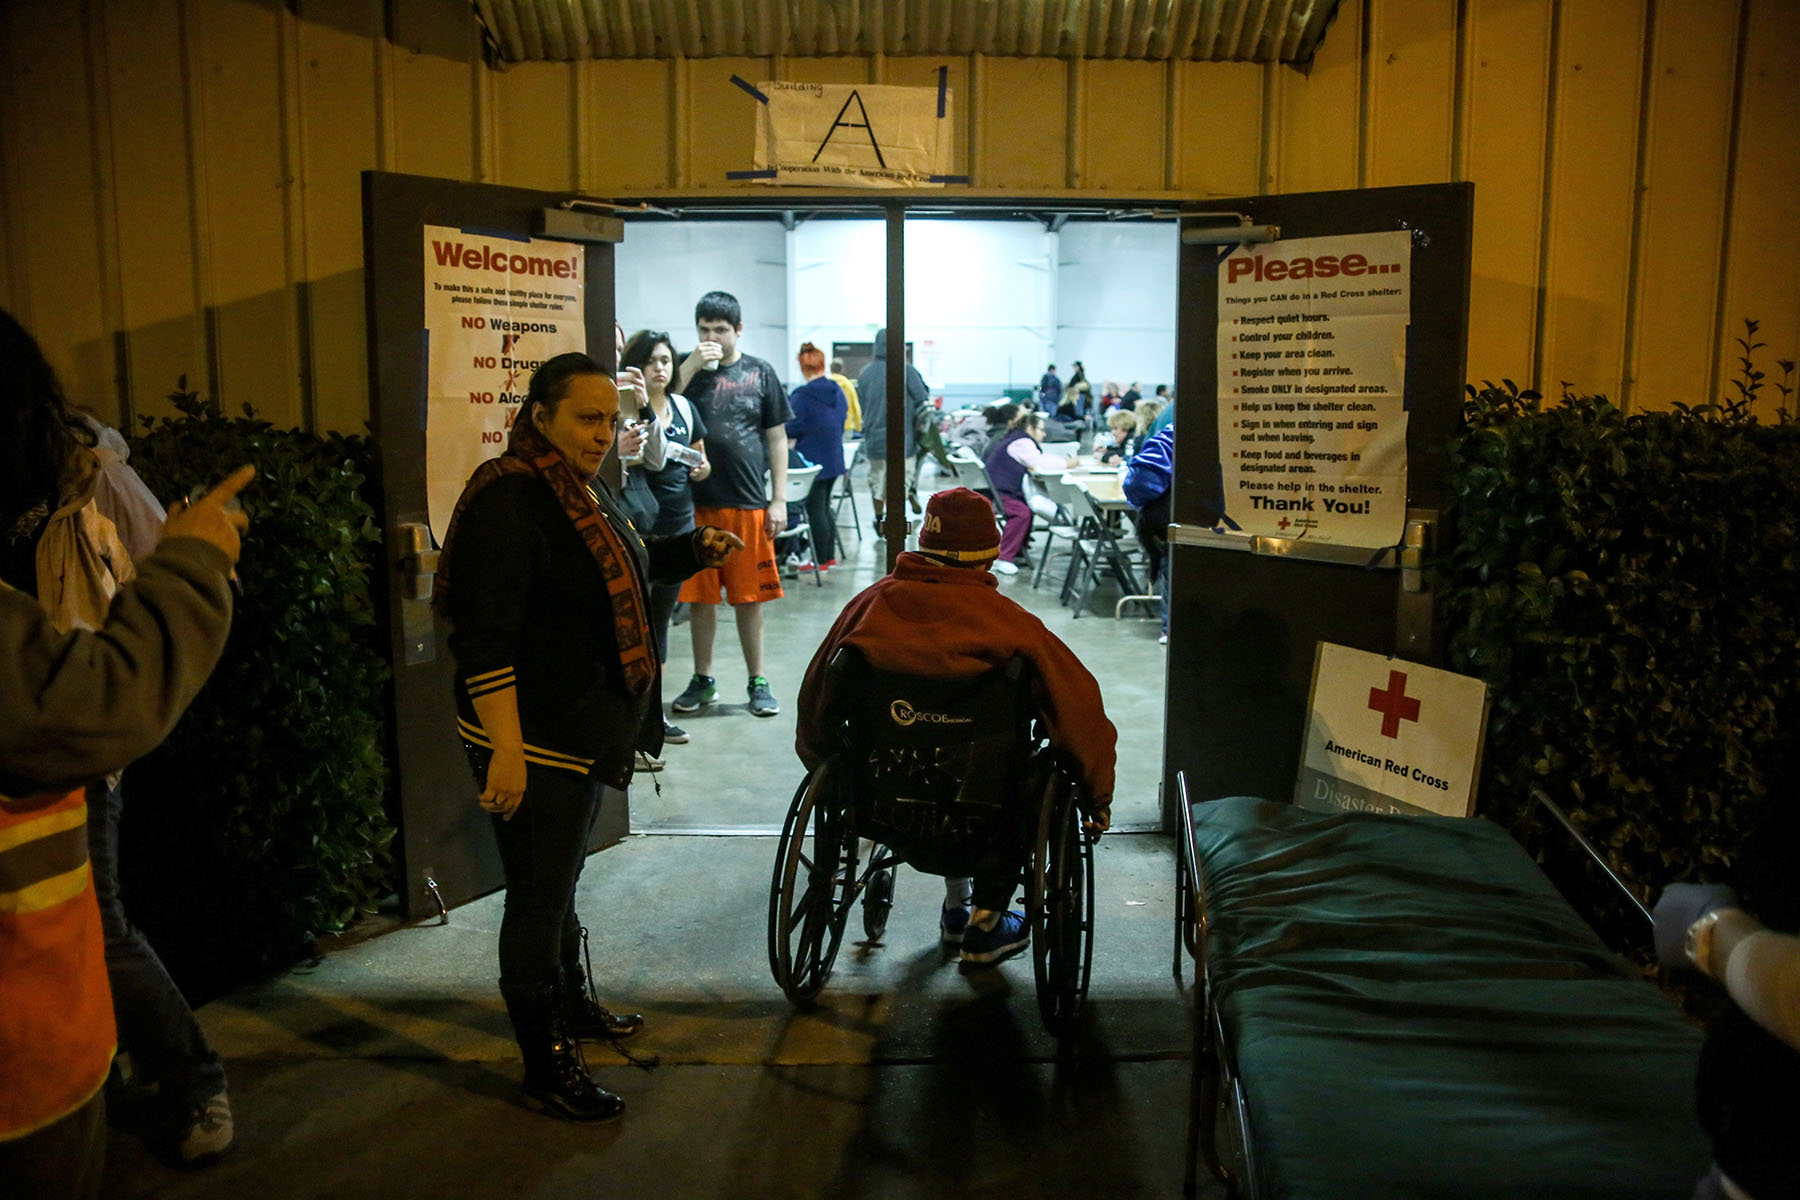 PHOTO: Evacuees at the Neighborhood Church after the Oroville Dam spillway prompted emergency evacuations of up to 180,000 people in Chico, California.